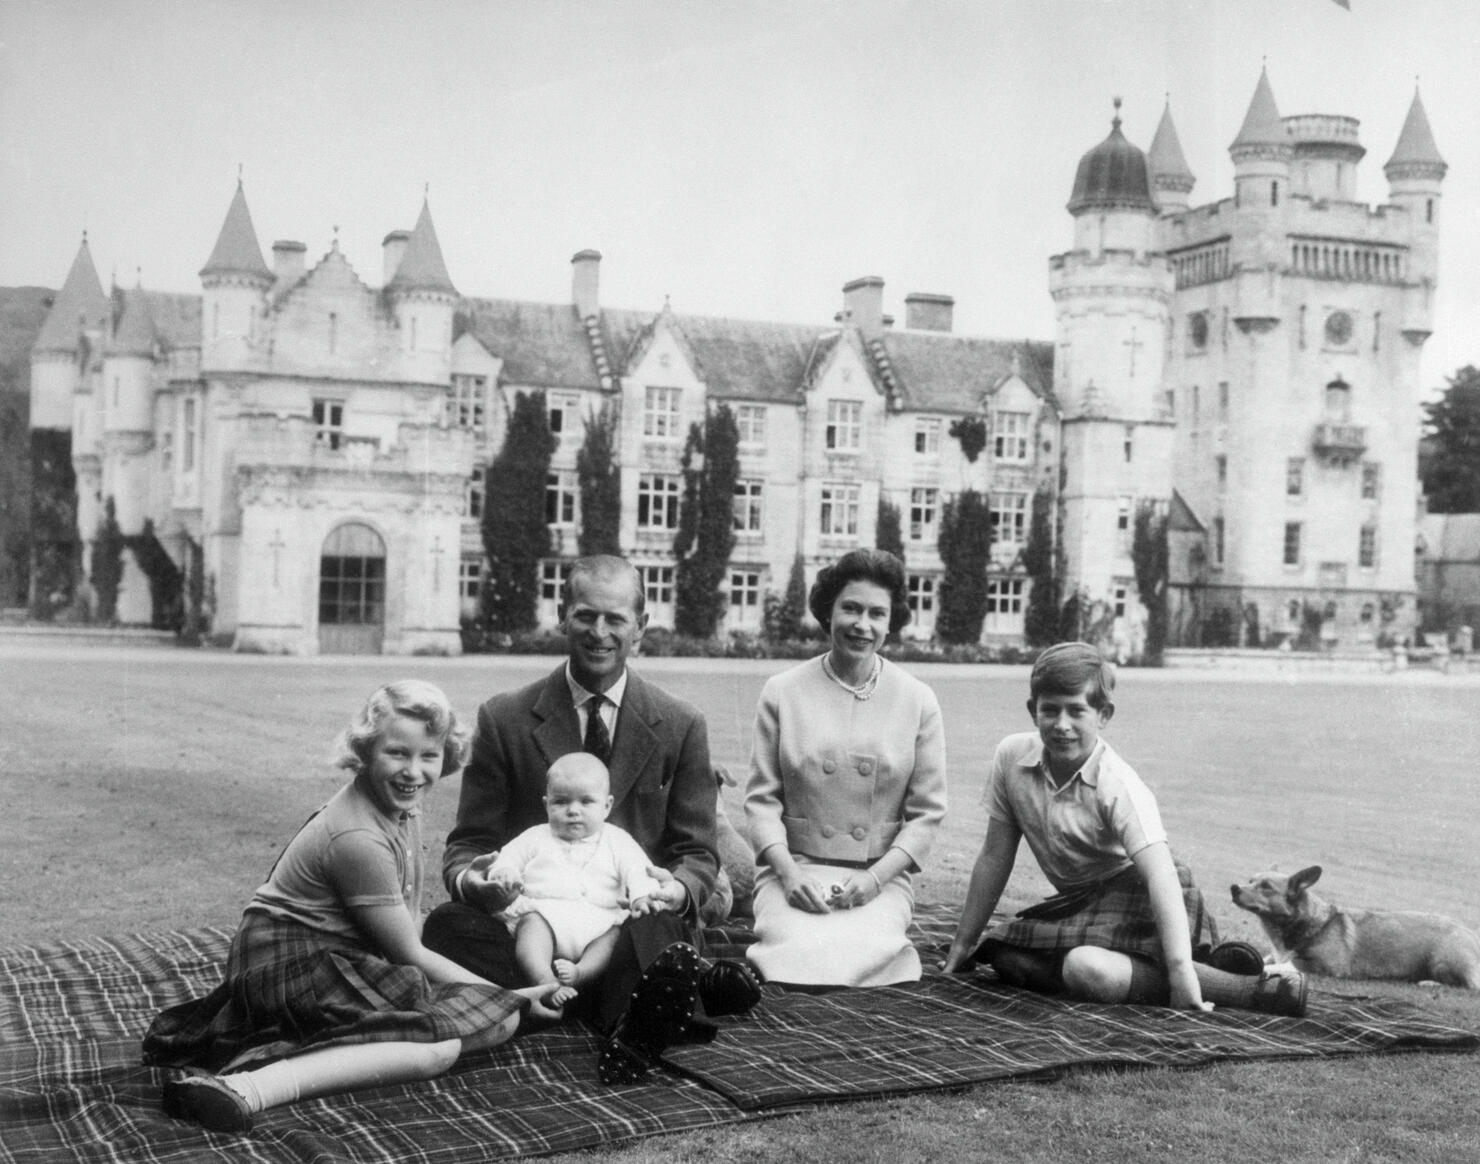 Queen Elizabeth at a Picnic with the Royal Family